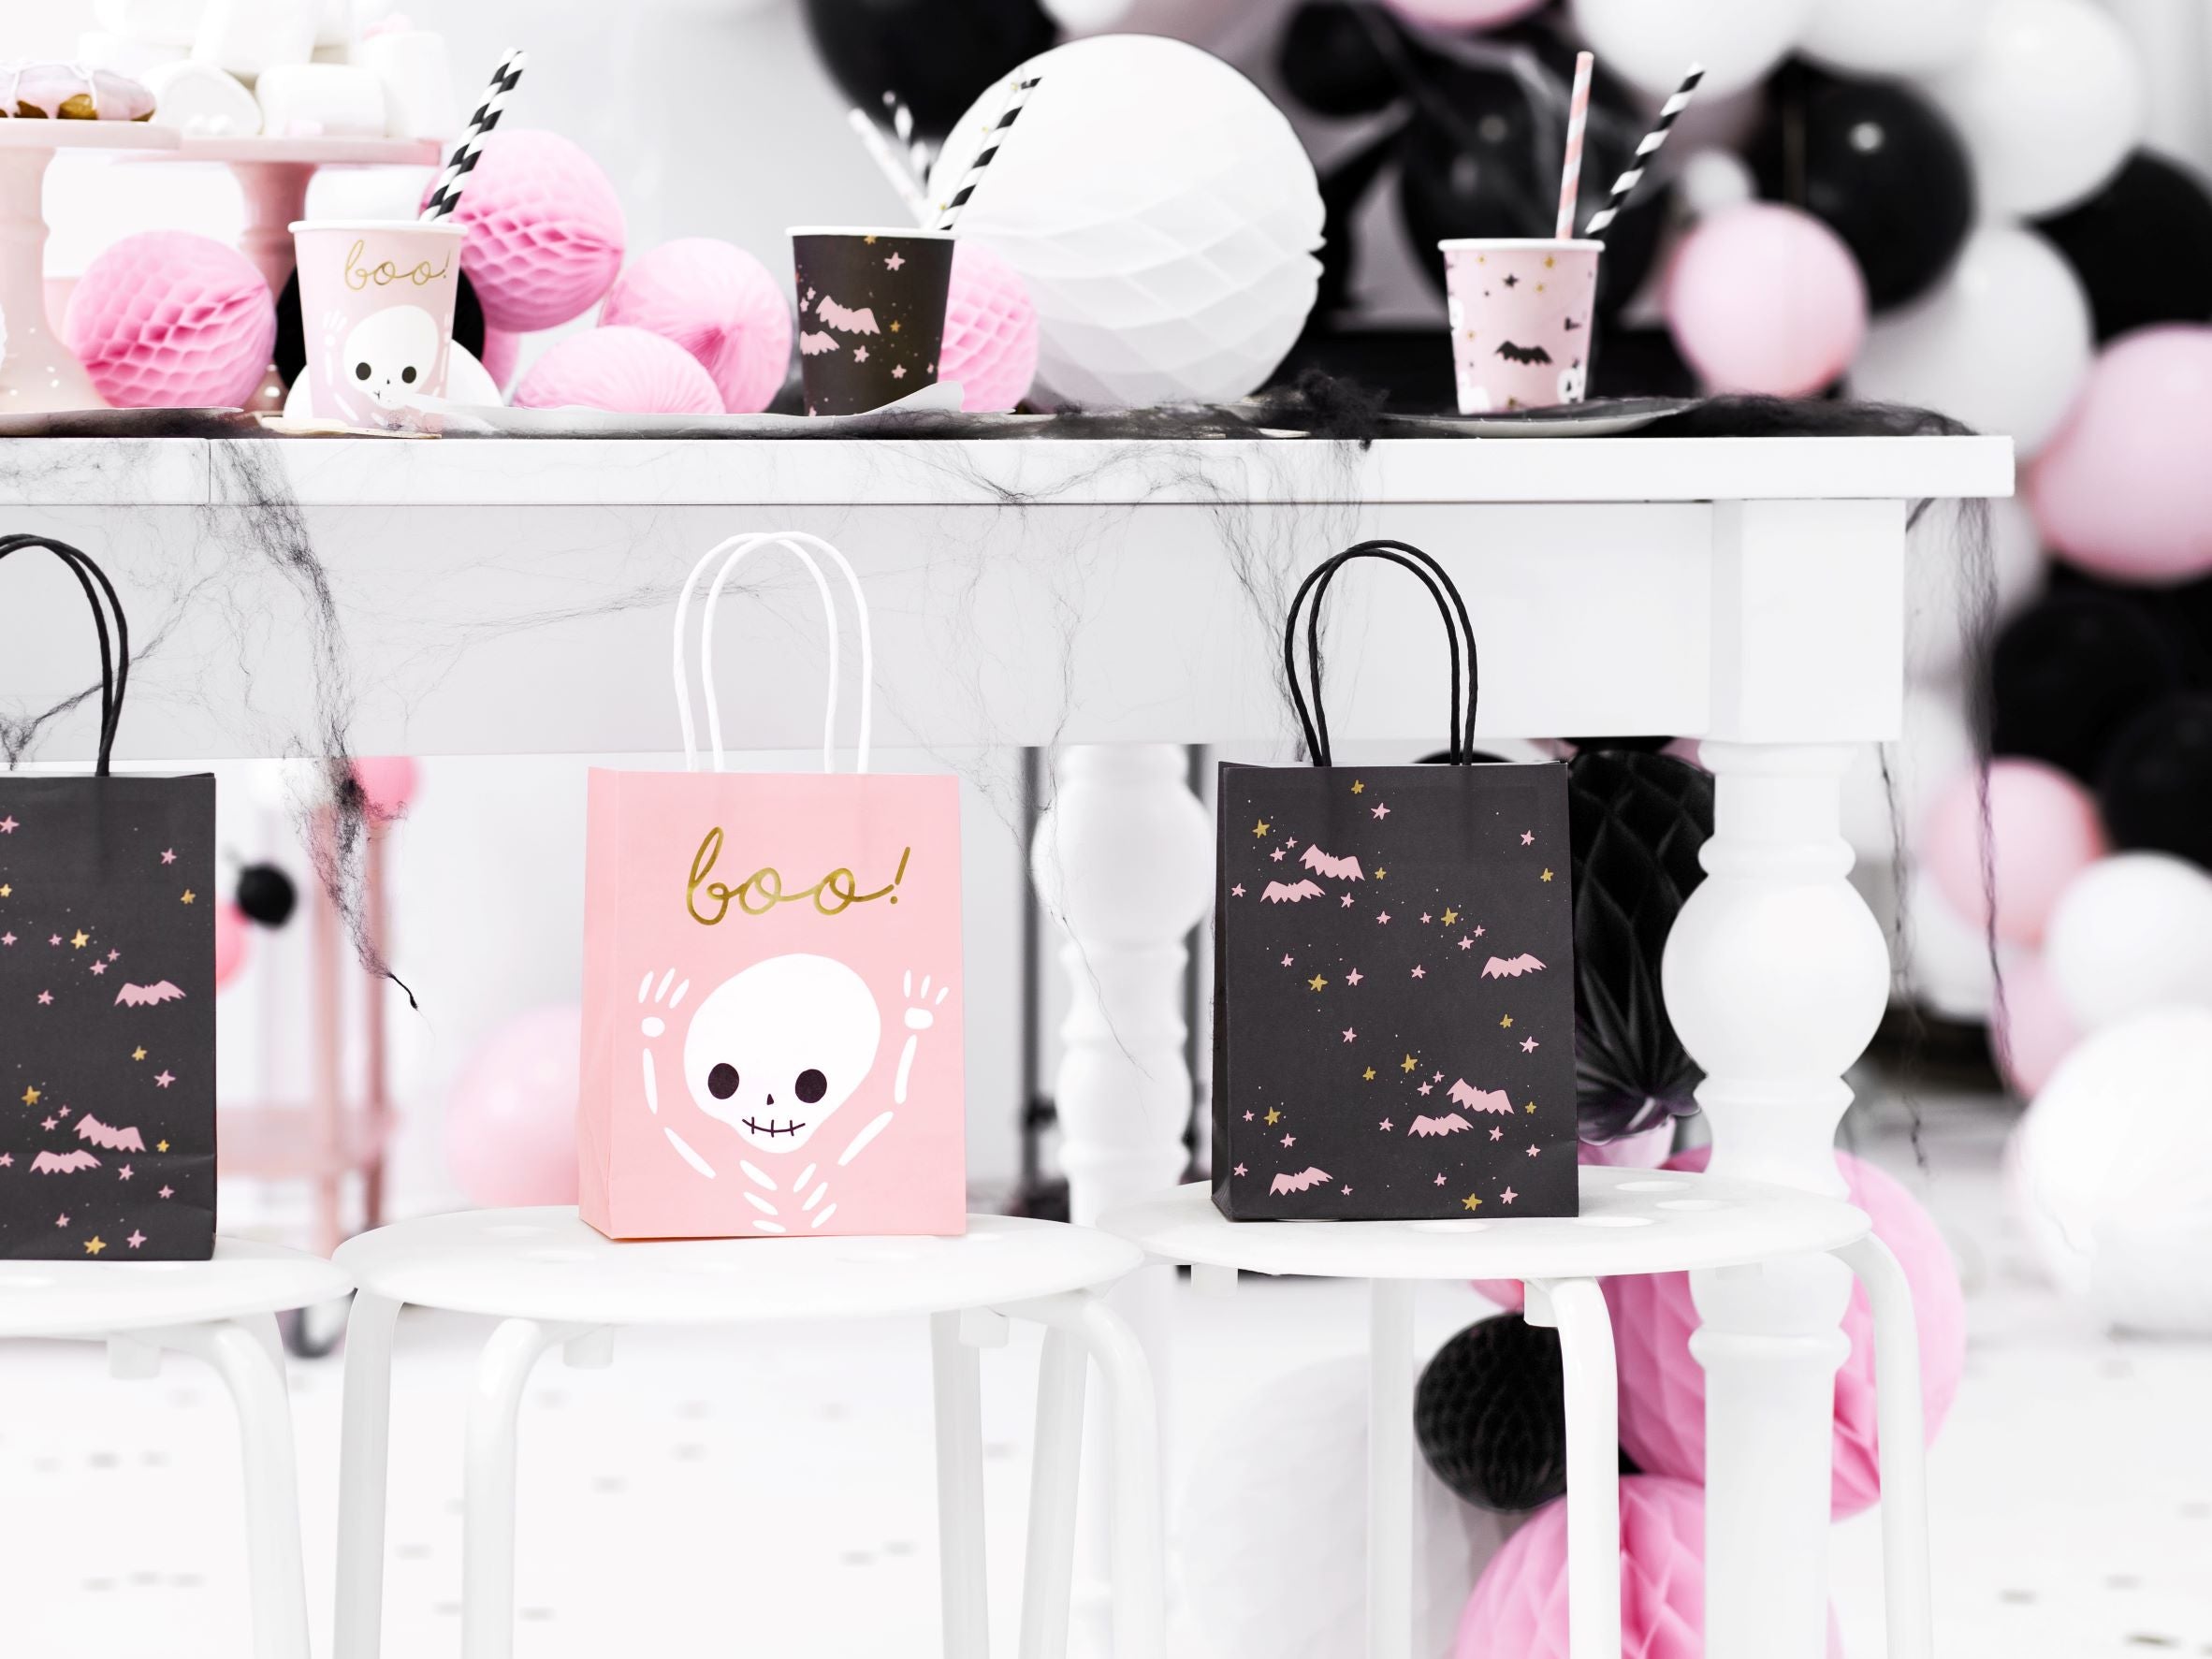 Boo Halloween Gift Bag Pink for party